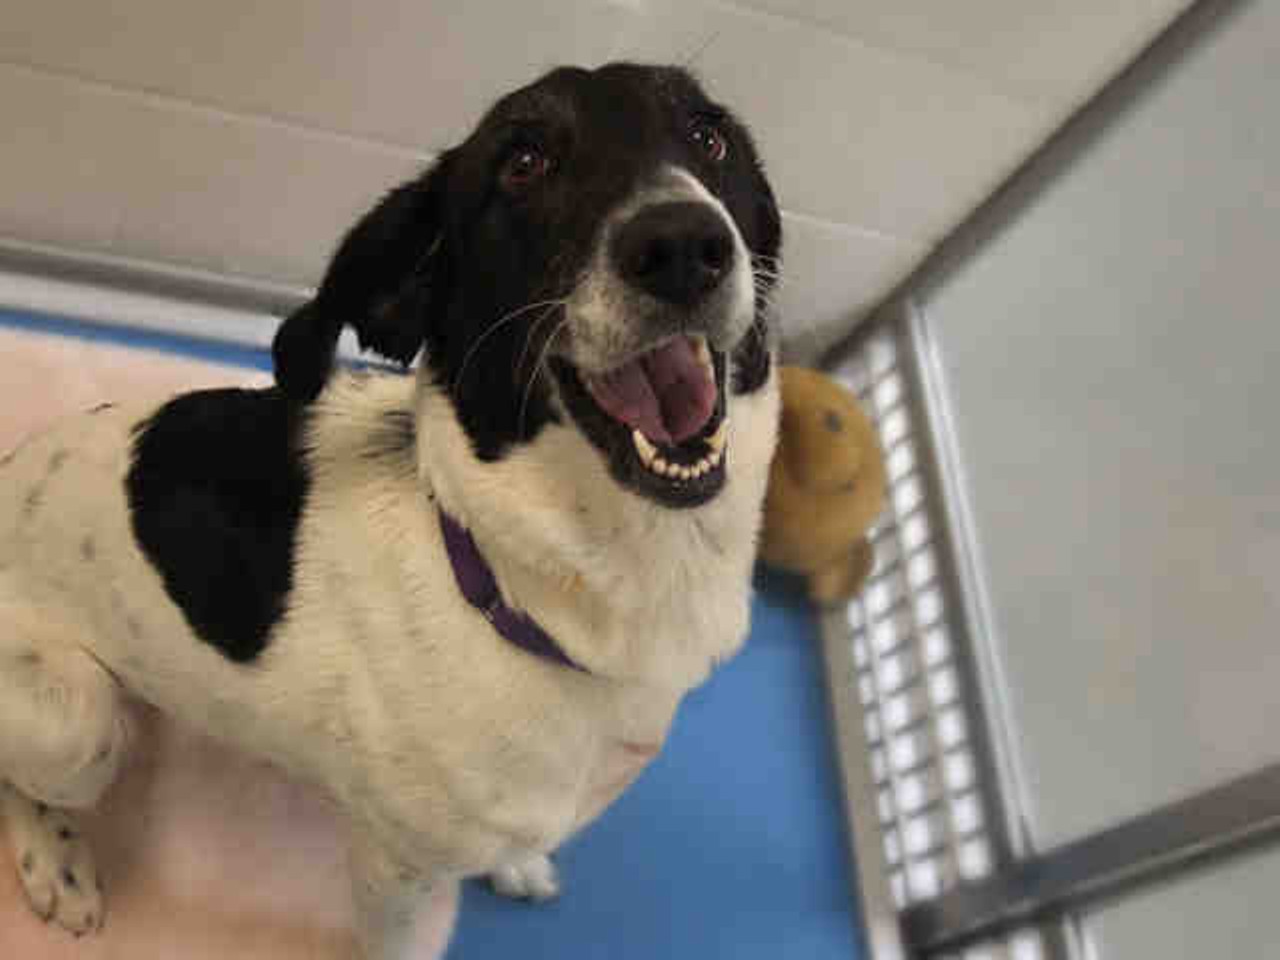 Marble
6 years old
White and black Treeing Walker Coonhound mix